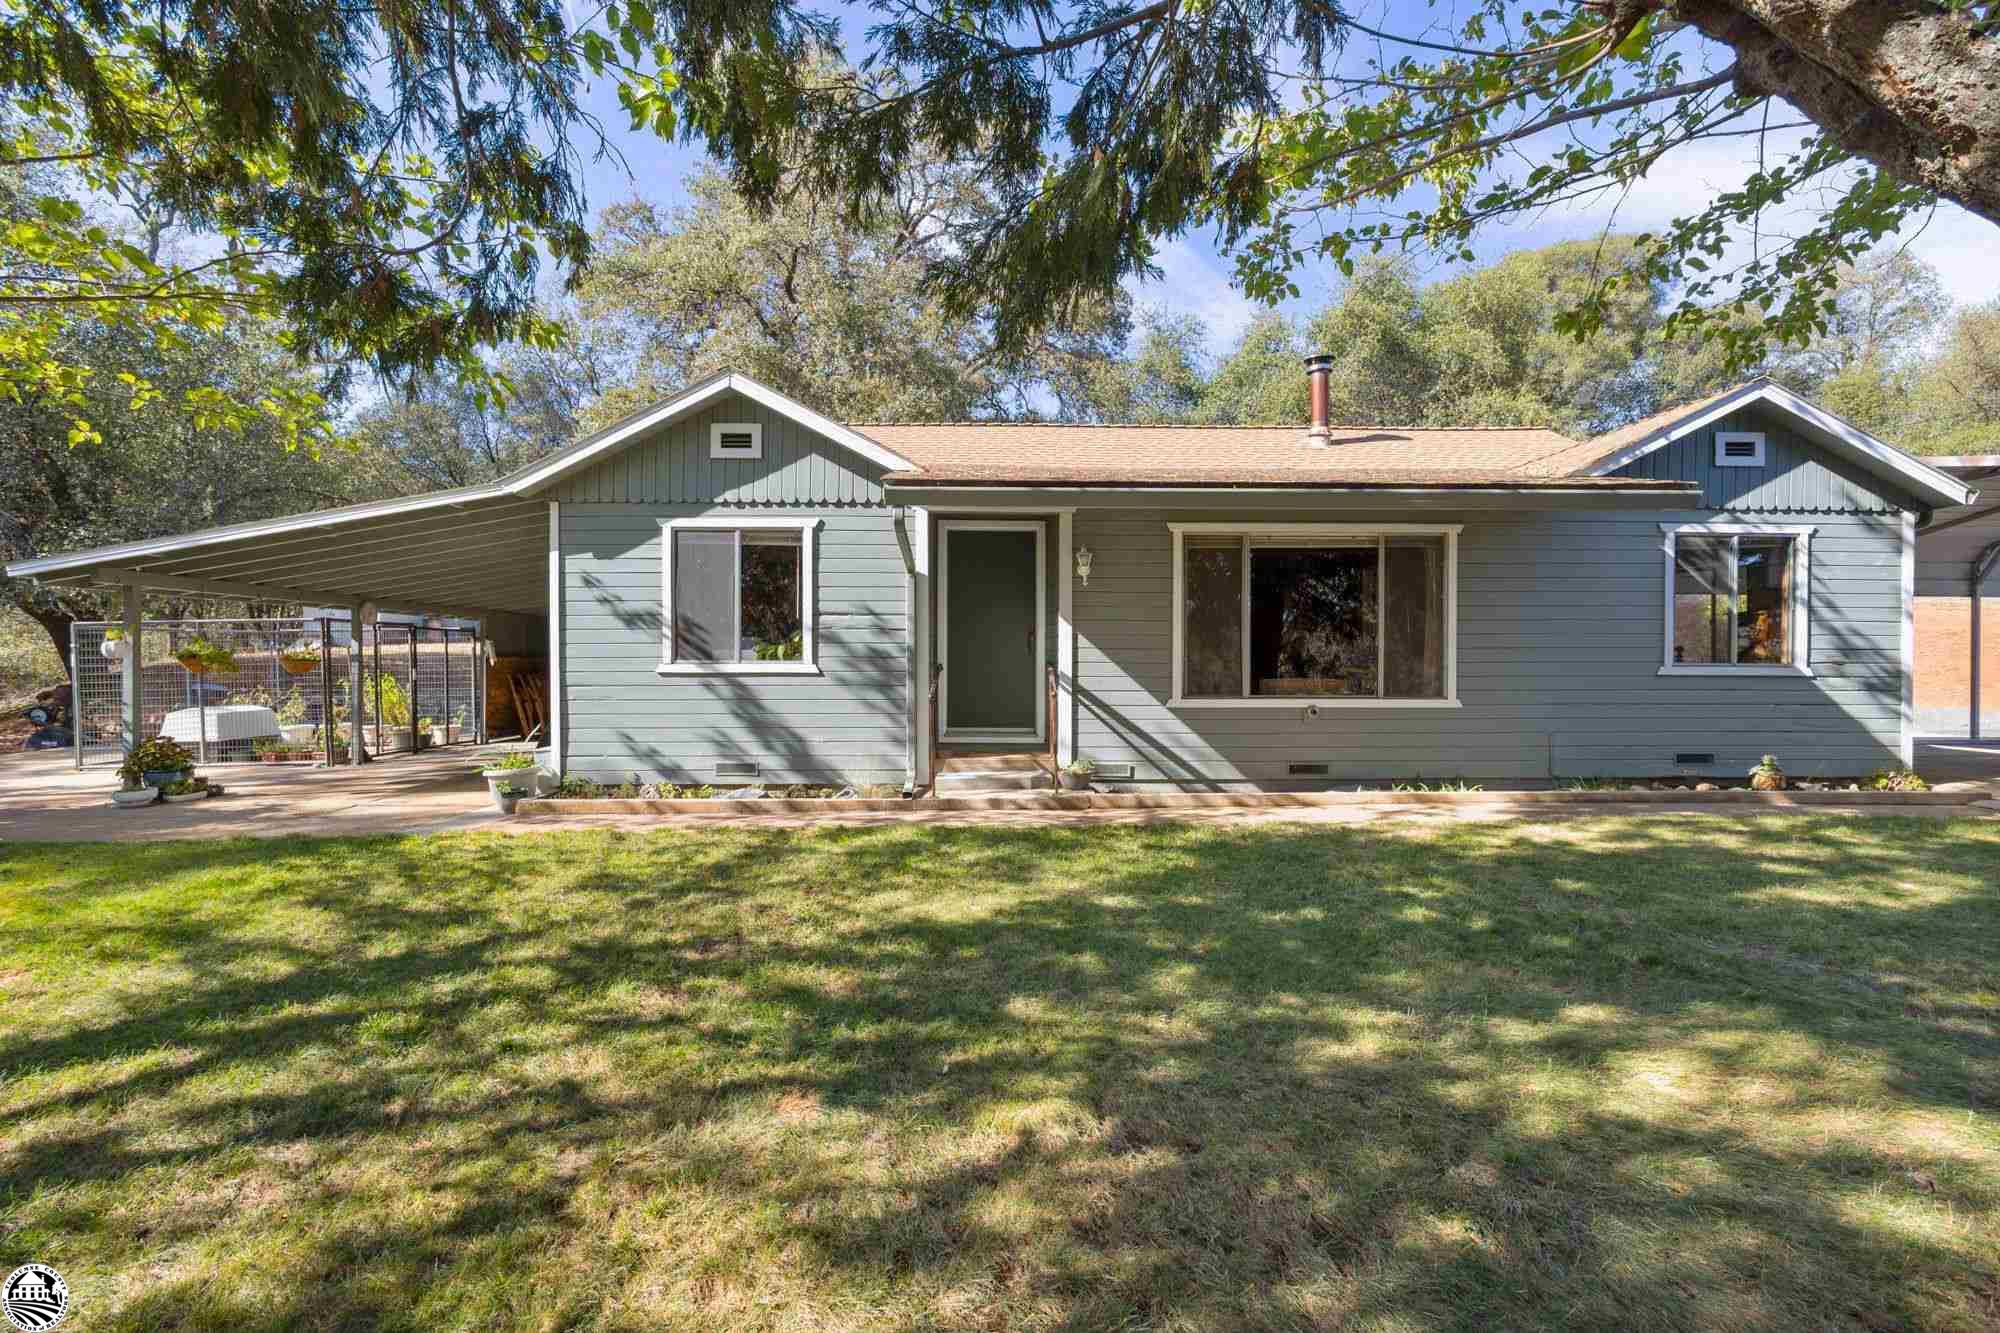 Take a look at this beautifully maintained 1 level home! Great location with easy access to HWY 108, shopping, and local entertainment. Sitting on a 1.67 acre lot and with 1200 sq. ft. this home has so much to offer! Easily entertain on the spacious concrete patio perfect for parties and events! Inside you’ll find 3 carpeted bedrooms and 1 bath with a single vanity, shower and tub, and storage! The large window in the living room allows for plenty of natural light showcasing the free-standing fireplace and the open-concept room. The kitchen features plenty of storage and space to gather and cook with loved ones. This home is one level. Outside you’ll find plenty of parking for guests or RVs with a large carport in the driveway. There are 2 large storage buildings on the property. Enjoy the serenity of living in the mountains out on your back patio! Pick up where the landscaper left off and create your dream yard! Don’t delay, call today for a private showing!